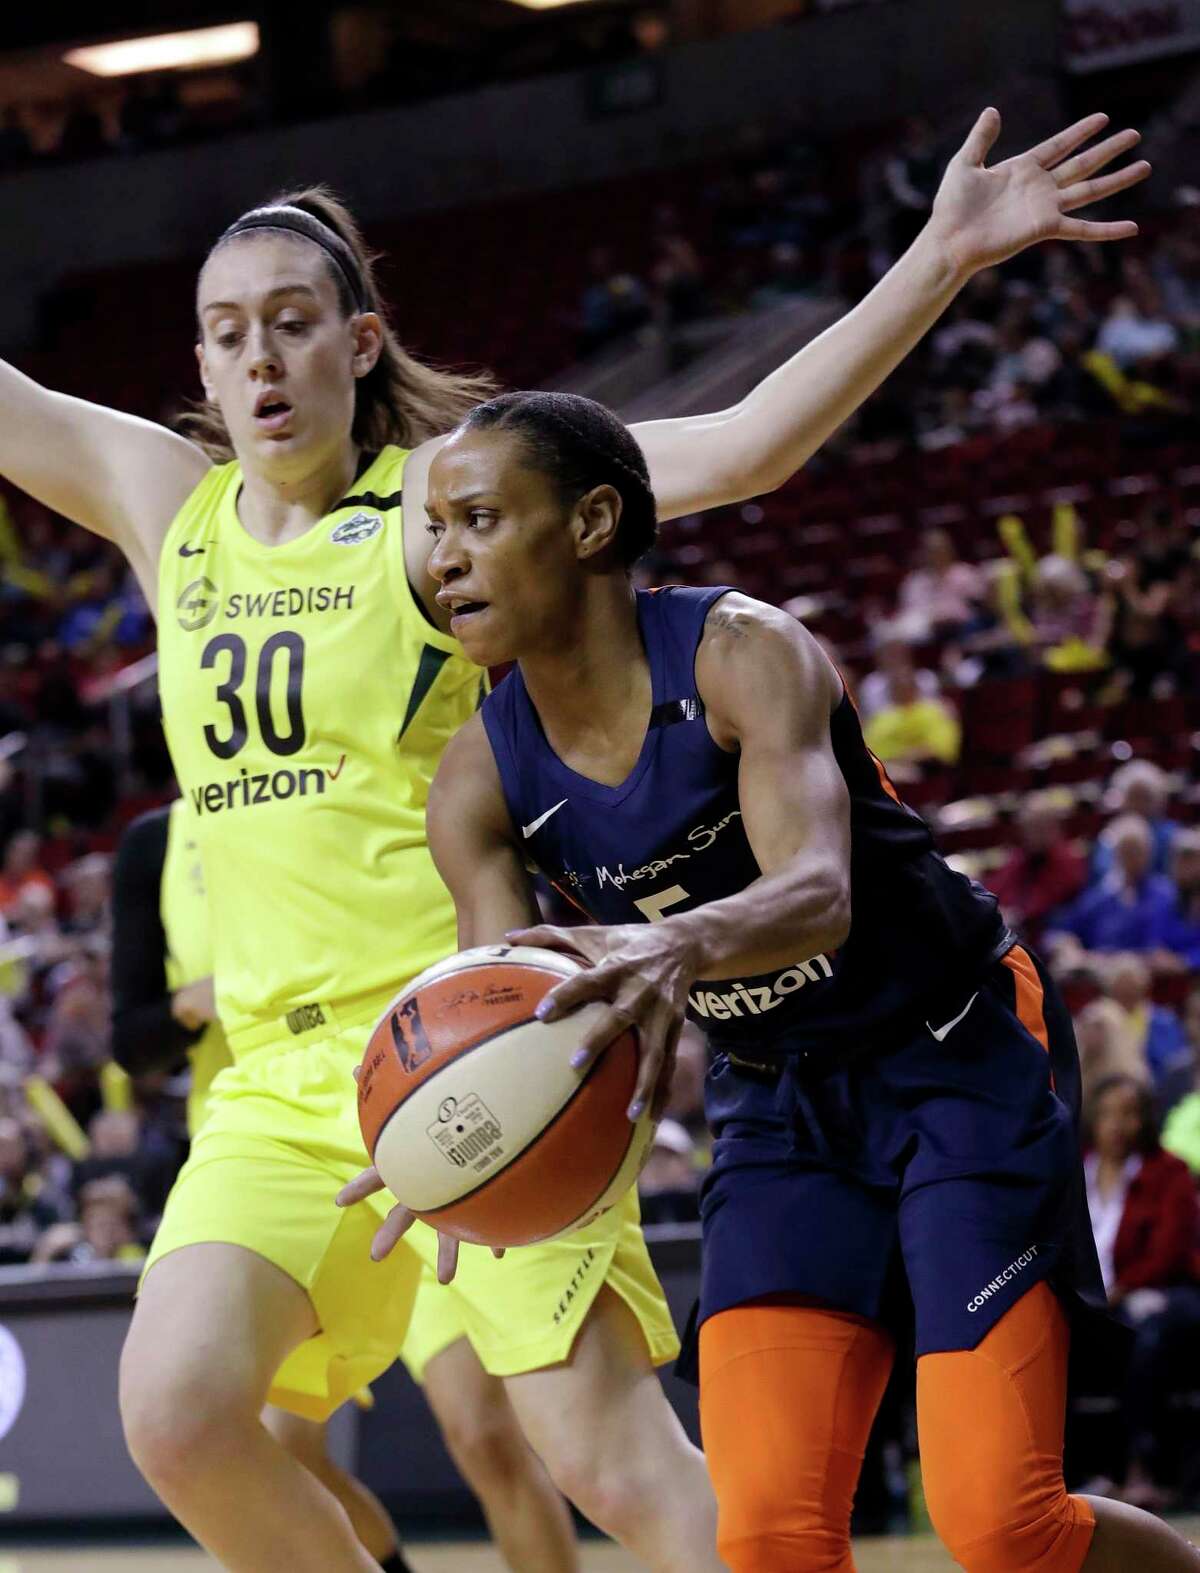 Connecticut Sun's Jasmine Thomas, right, tries to drive past Seattle Storm's Breanna Stewart during the first half of a WNBA basketball game Friday, June 15, 2018, in Seattle. (AP Photo/Elaine Thompson)